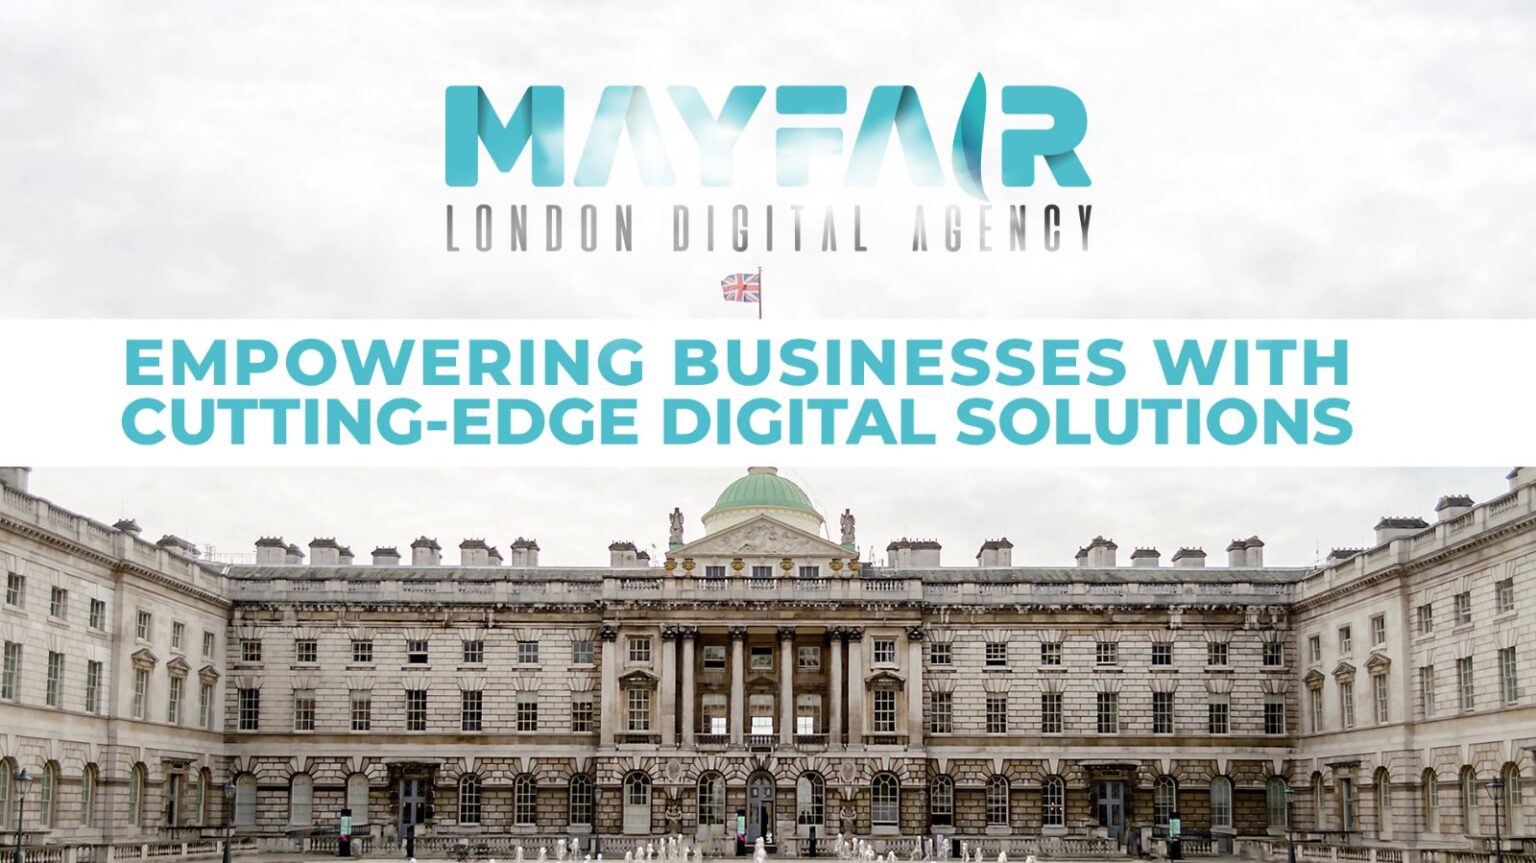 Experience the London Social Media Agency difference and unlock the full potential of your digital presence.